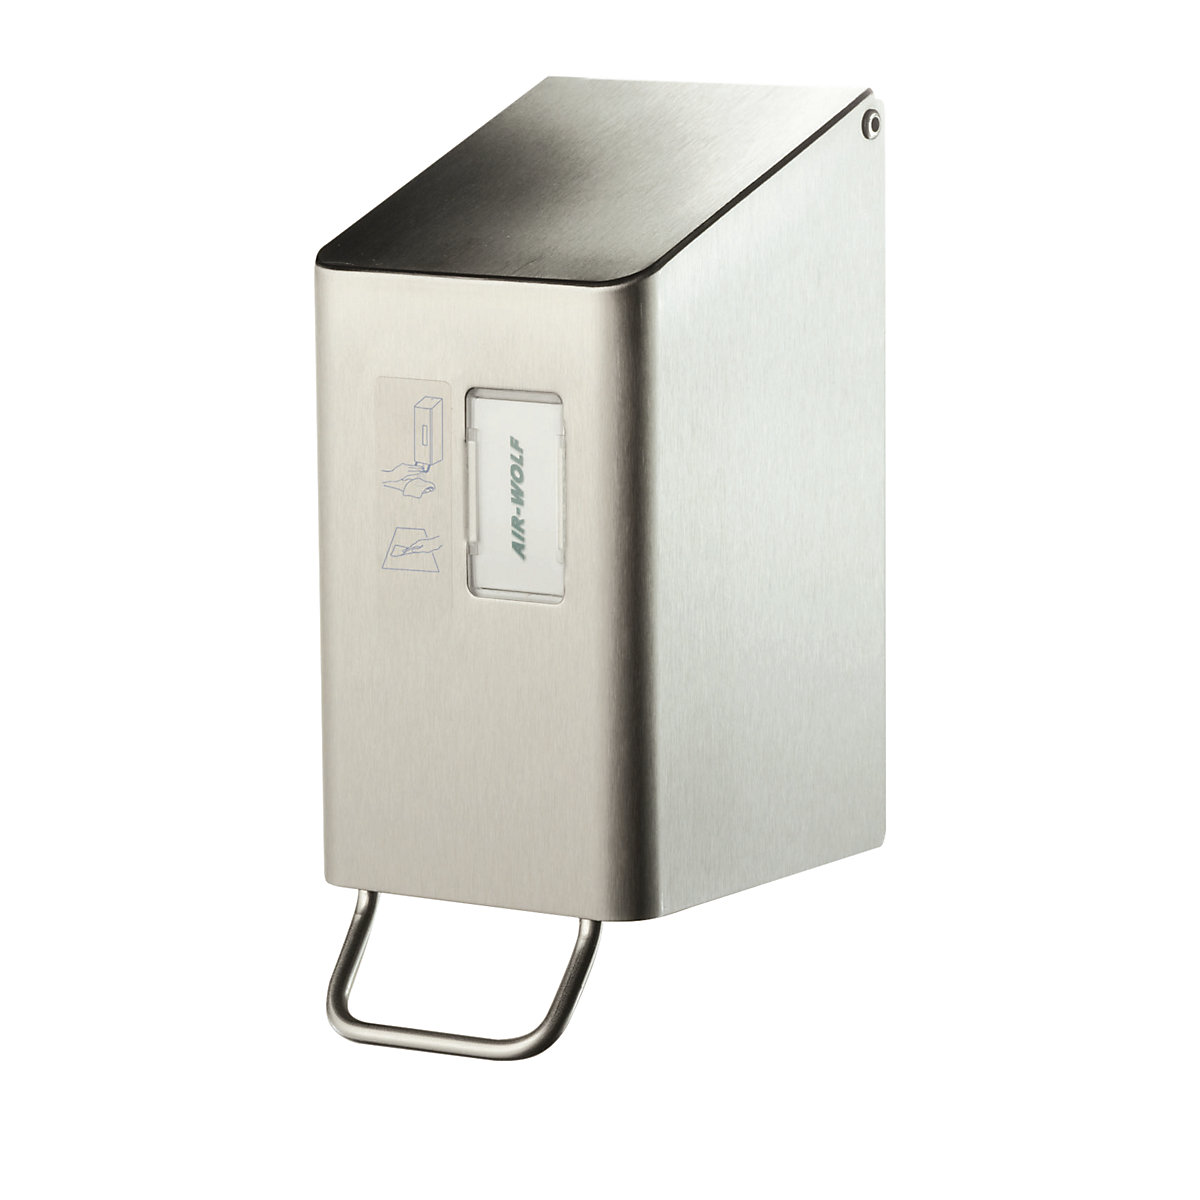 Dispenser for WC seat cleaner - AIR-WOLF